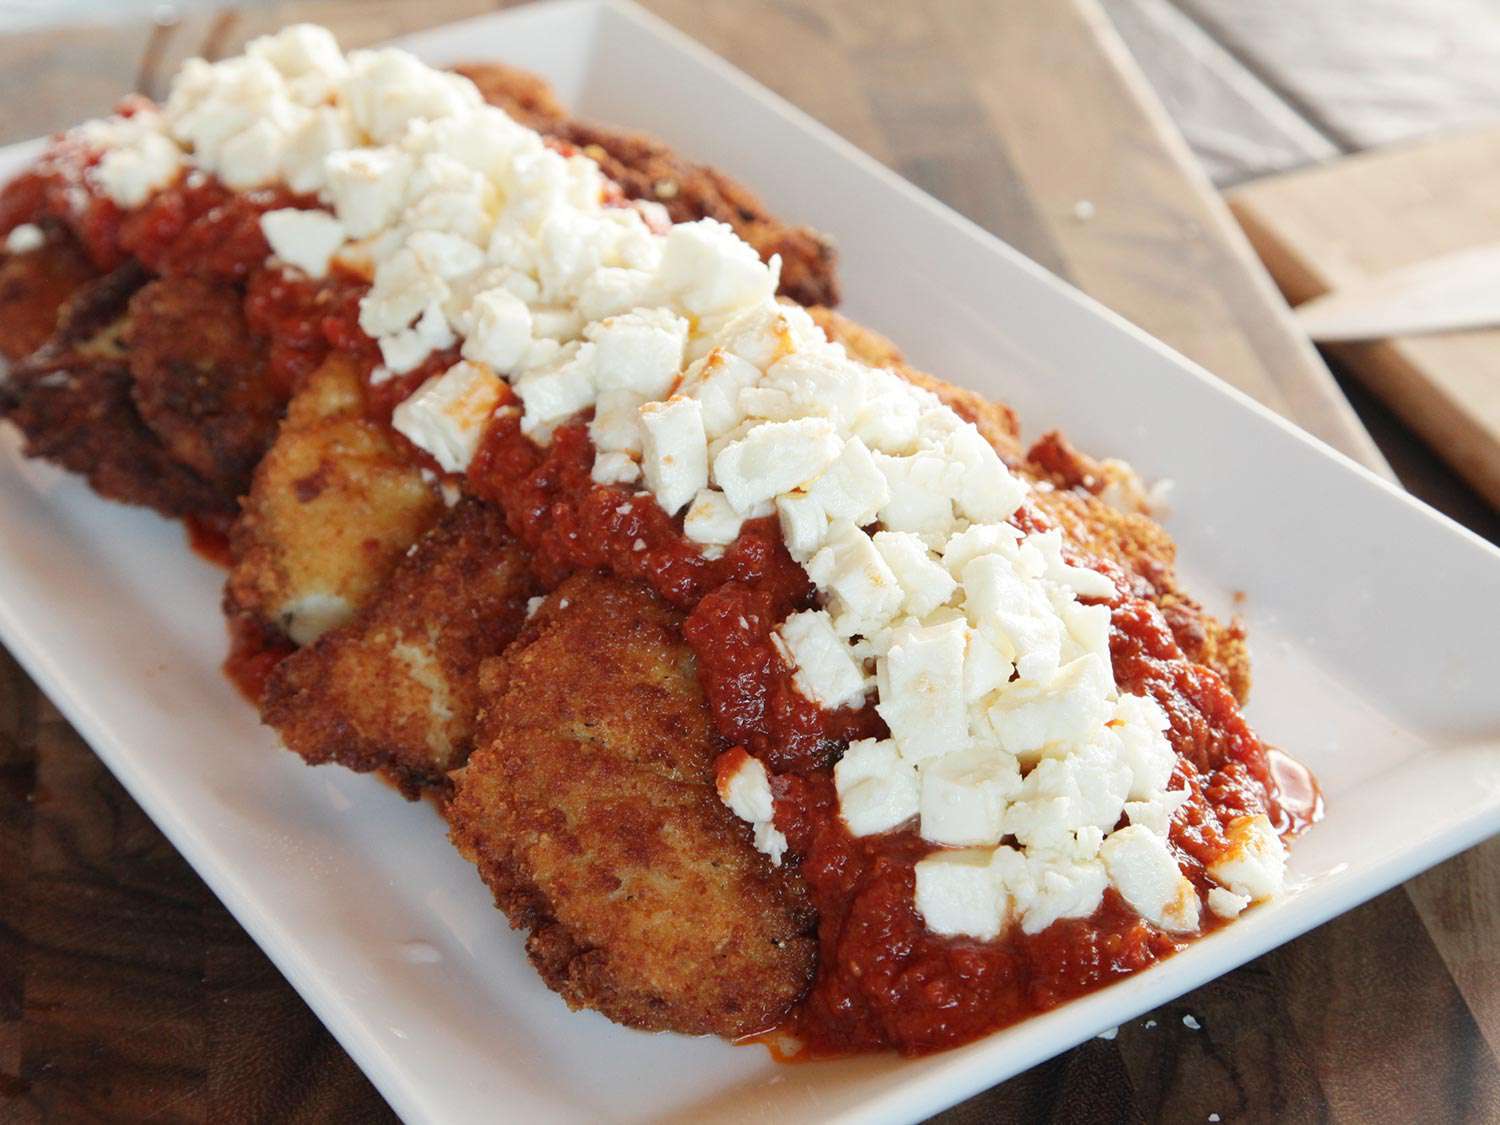 Mozzarella and parmesan cheeses layered over red sauce down the center of shingled fried chicken breasts